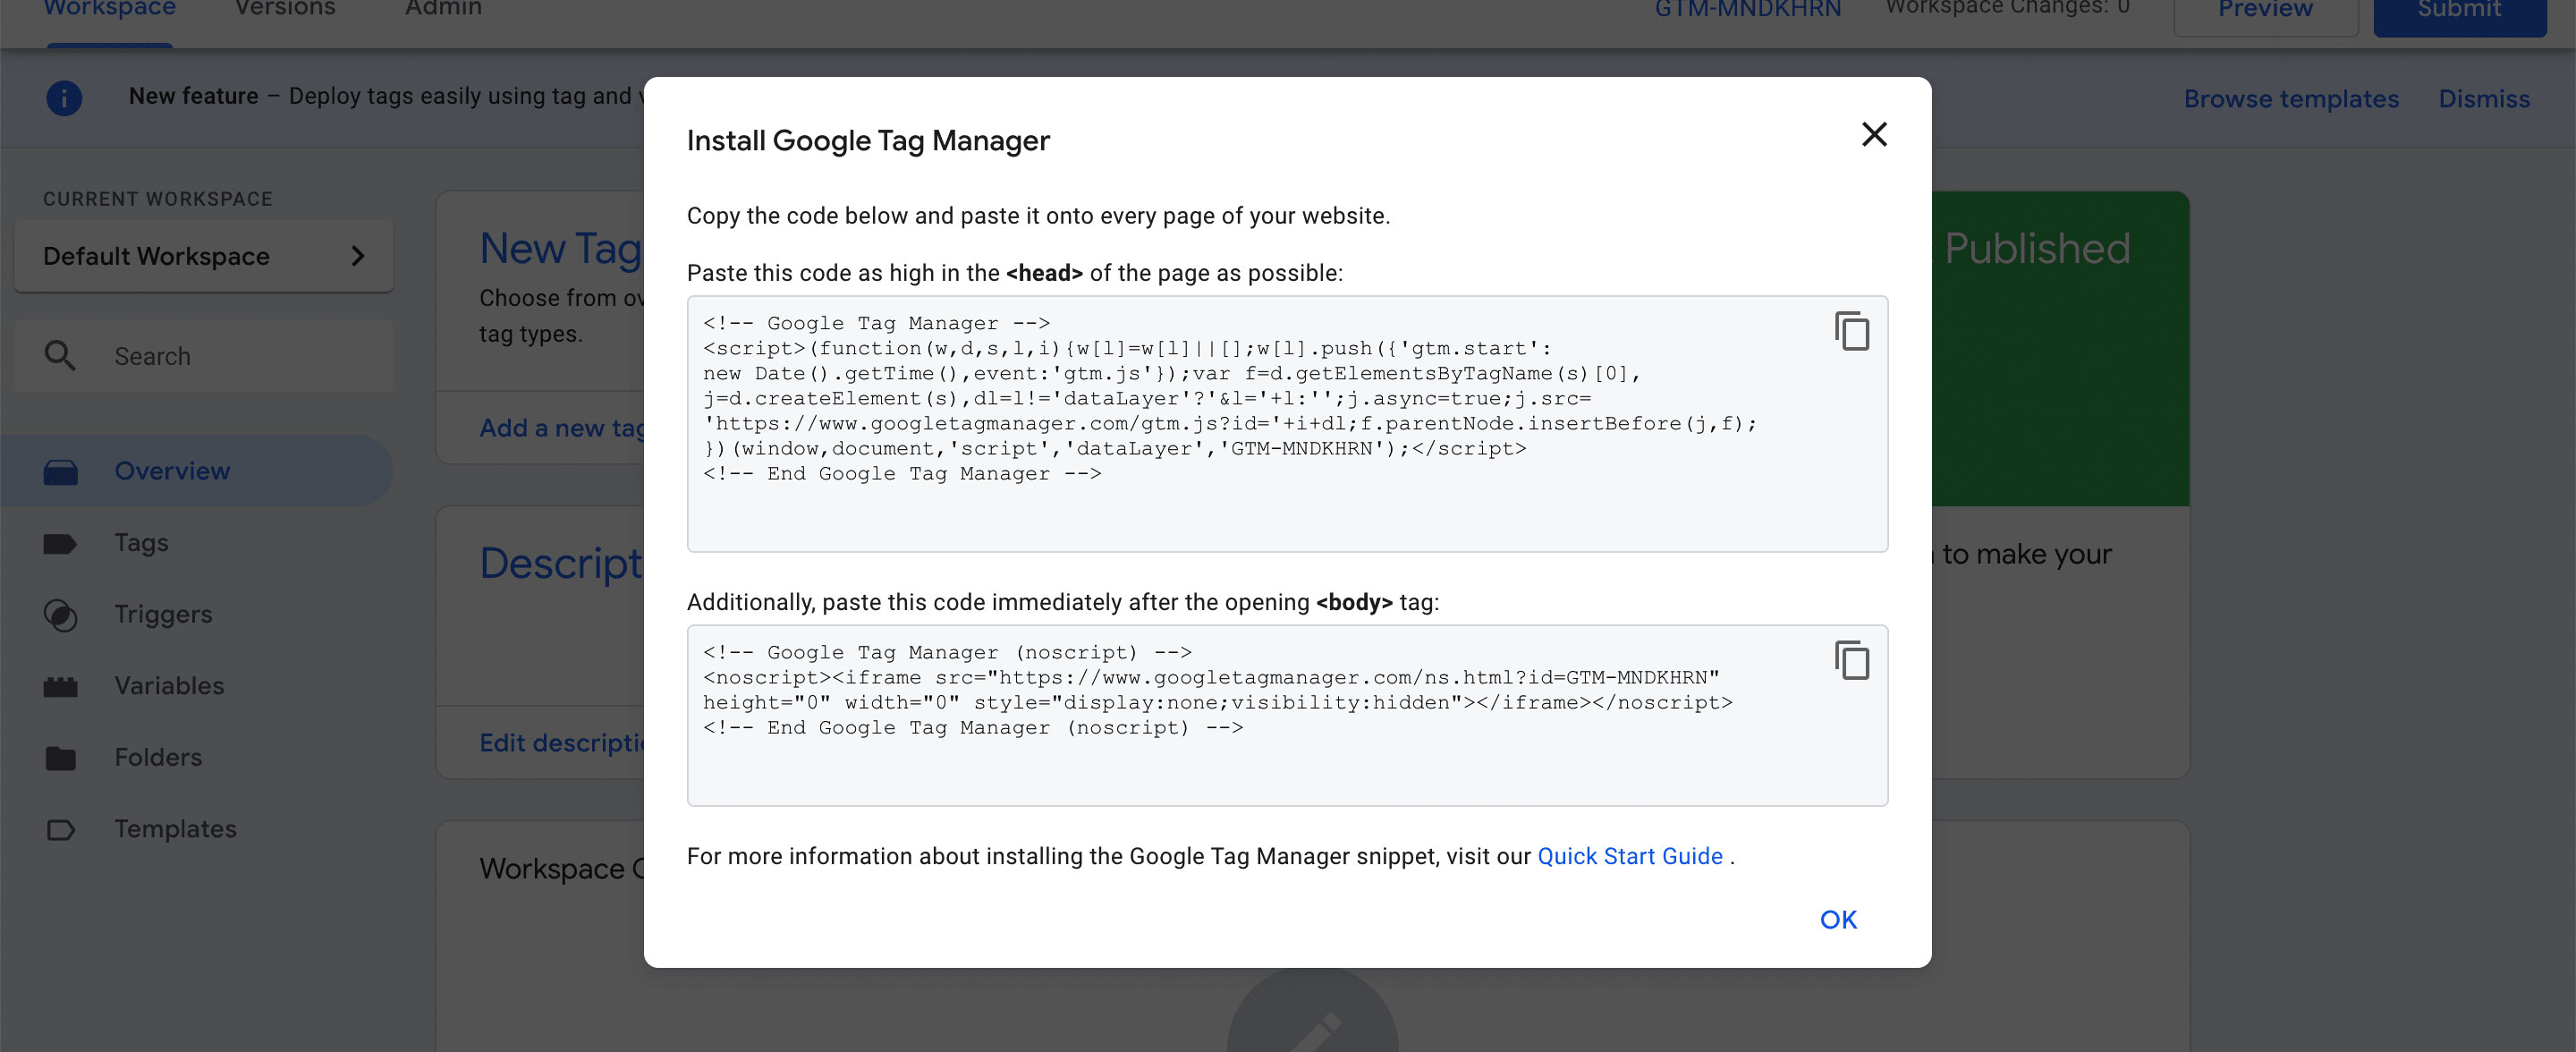 Google Tag Manager install snippet